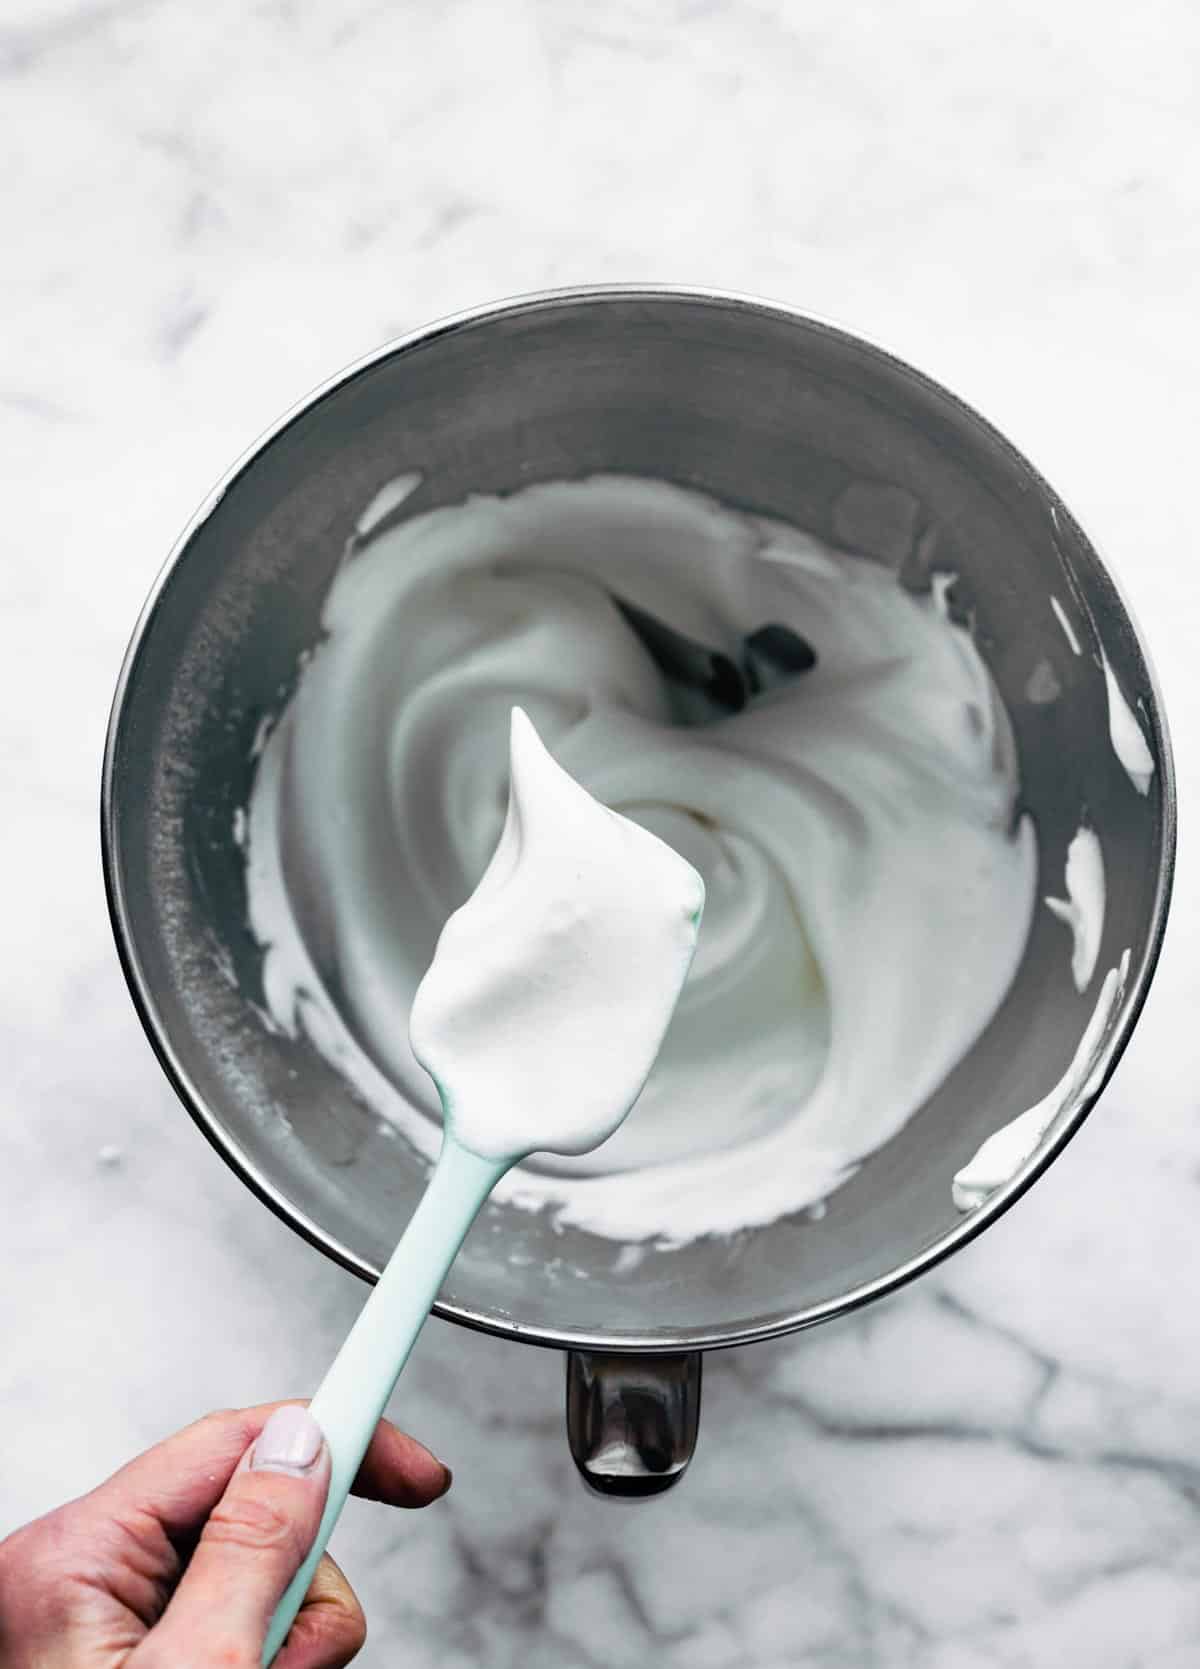 A woman's hand holding a spatula of whipped cream over a mixing bowl.